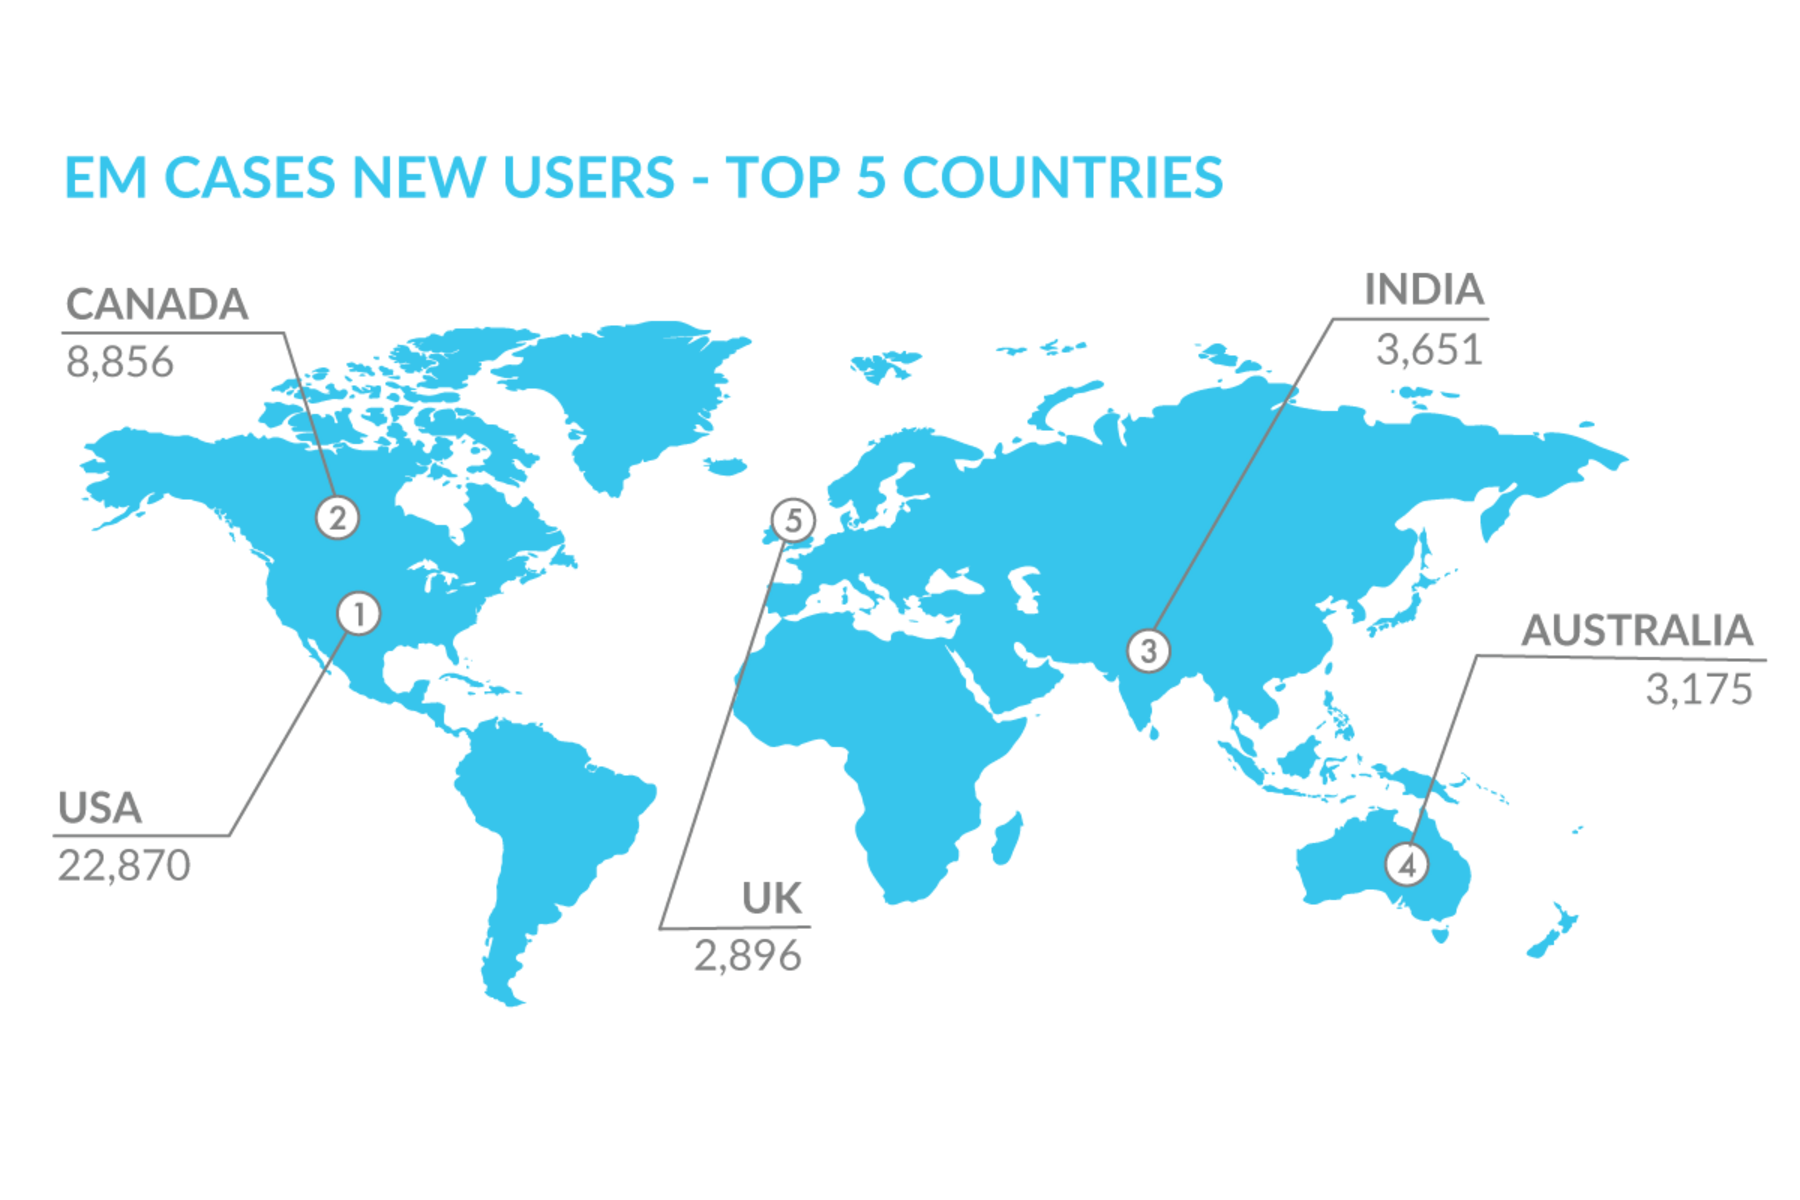 Infographic with picture of World showing EM Cases New Users - Top 5 Countries:  1.  USA - 22,870, 2.  Canada - 8,856, 3.  India - 3,651, 4.  Australia - 3,175 5.  UK - 2,896